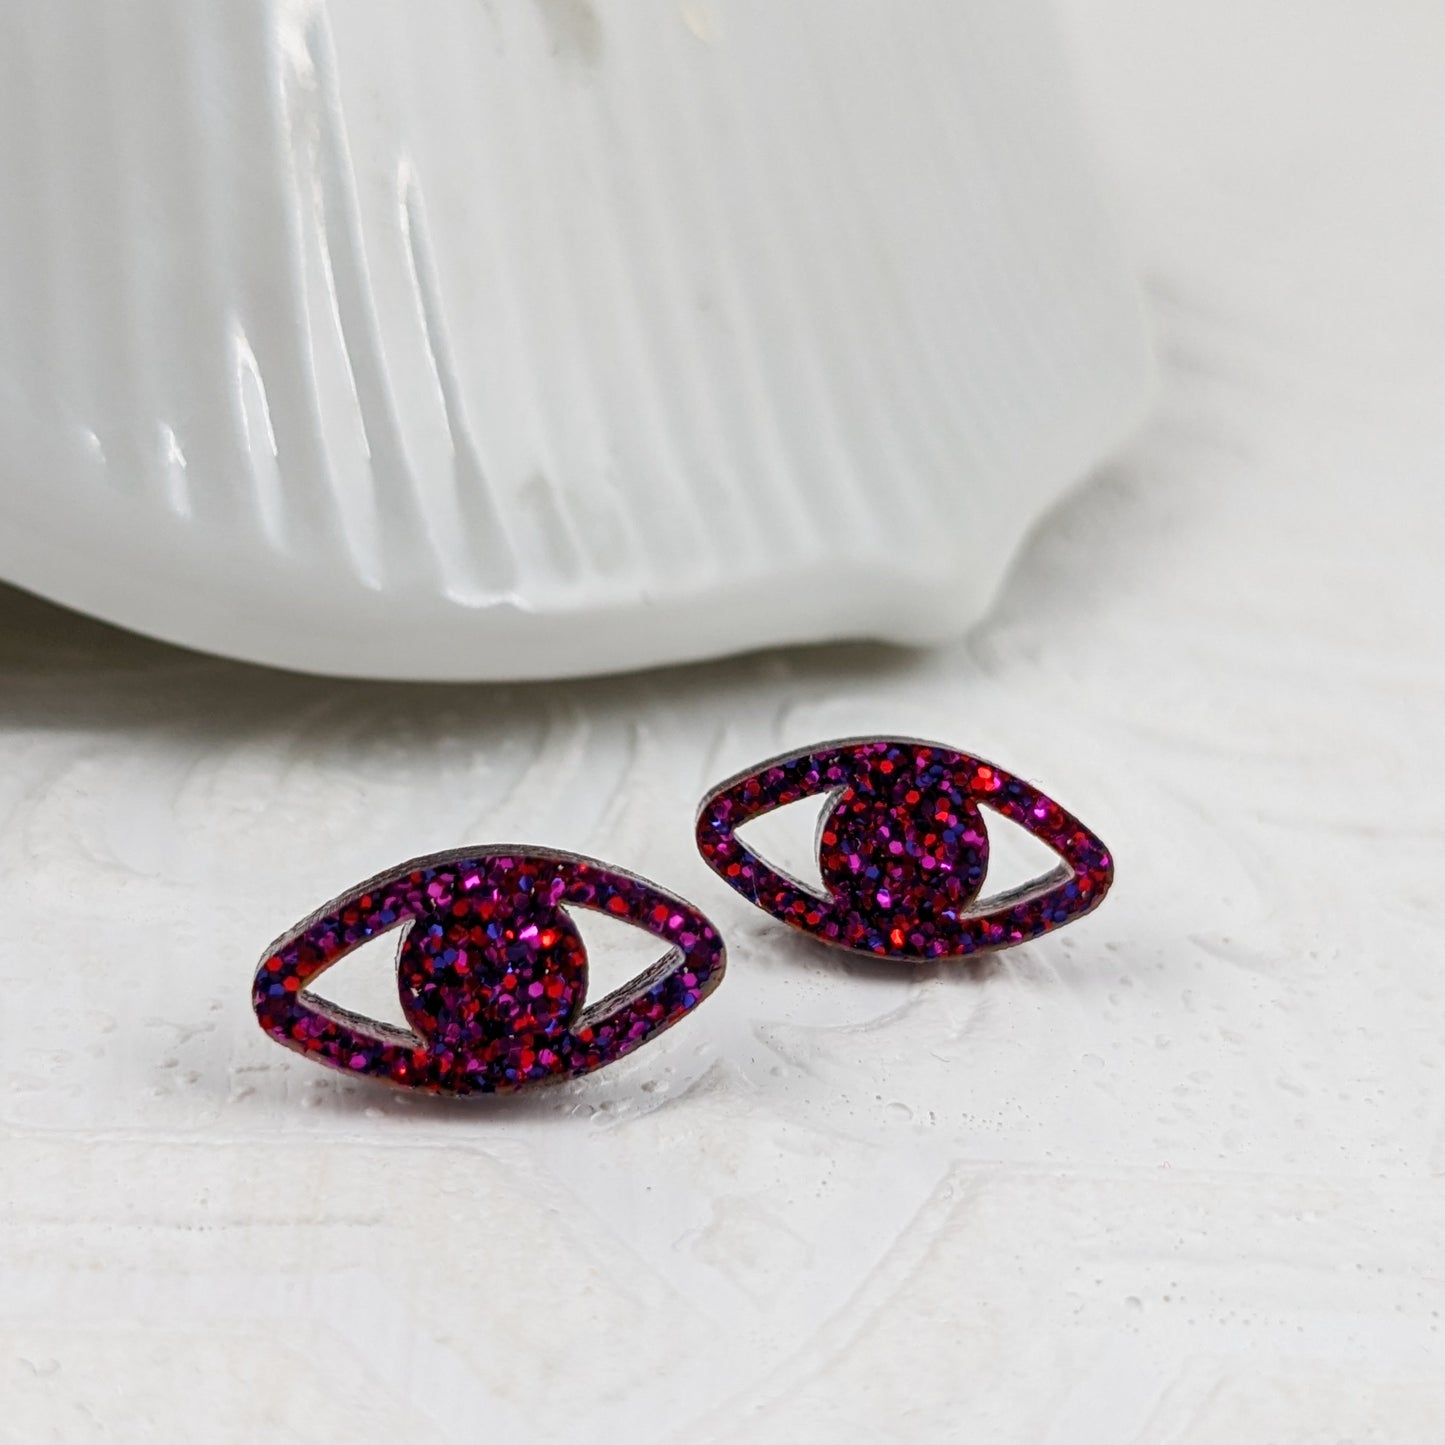 Eye shaped stud earrings made with ruby sparkle acrylic and stainless steel posts, white background